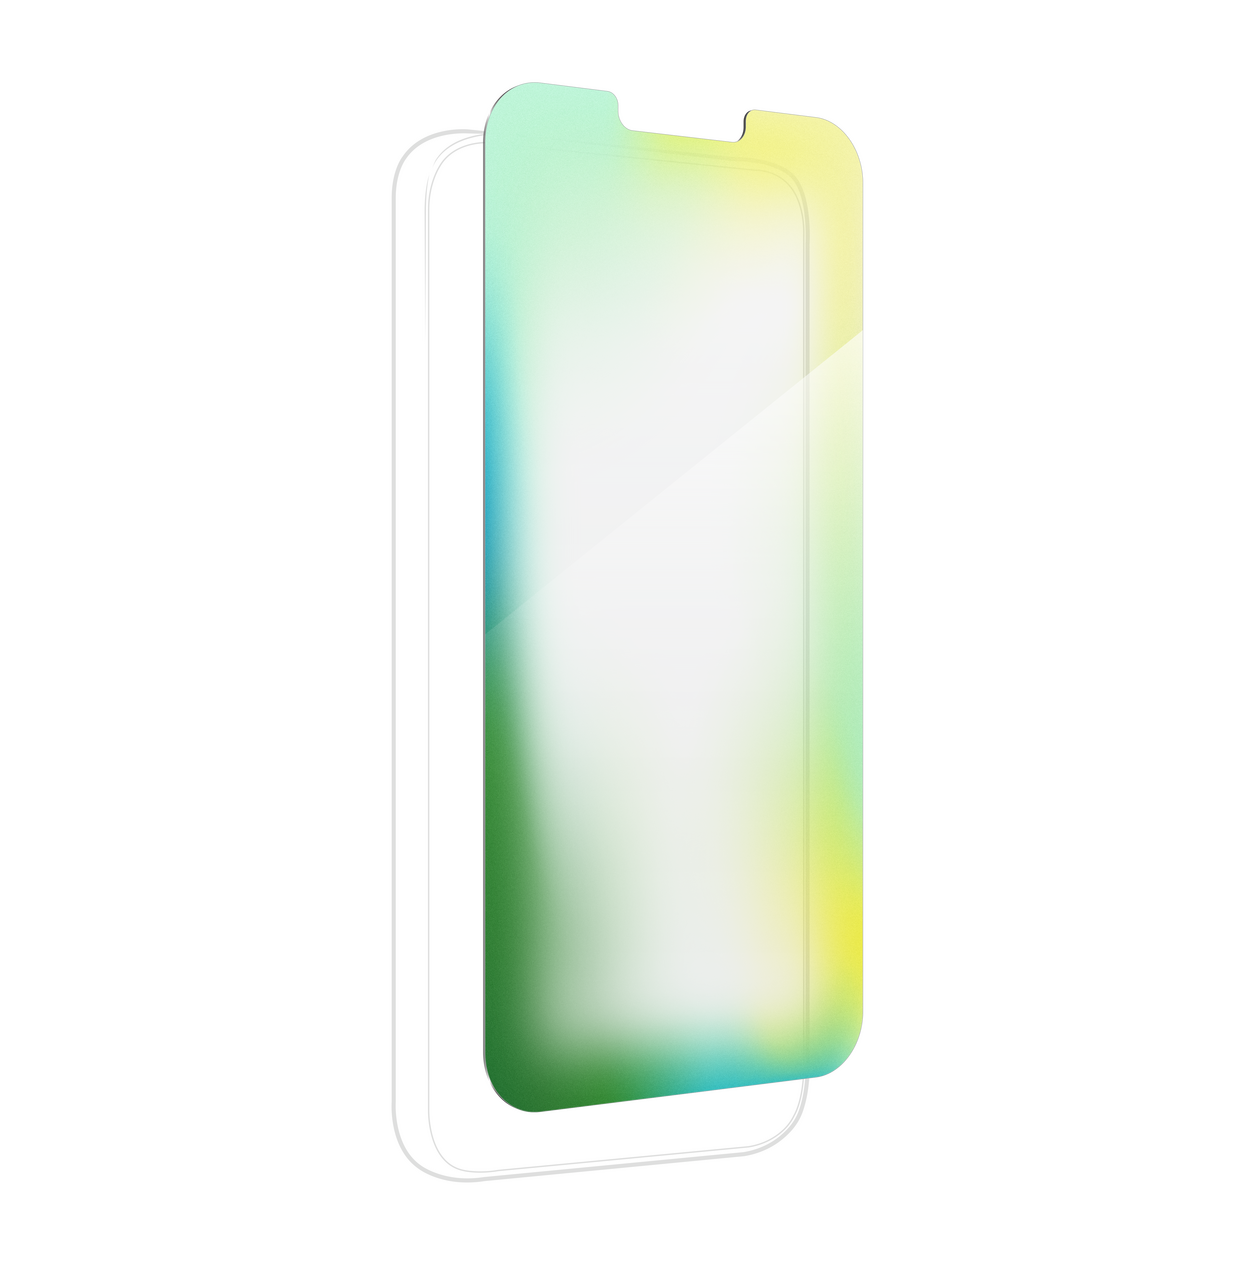 InvisibleShield Ultra Eco Apple iPhone 14/iPhone 13 Pro/iPhone 13 (Case  Friendly) - ZAGG